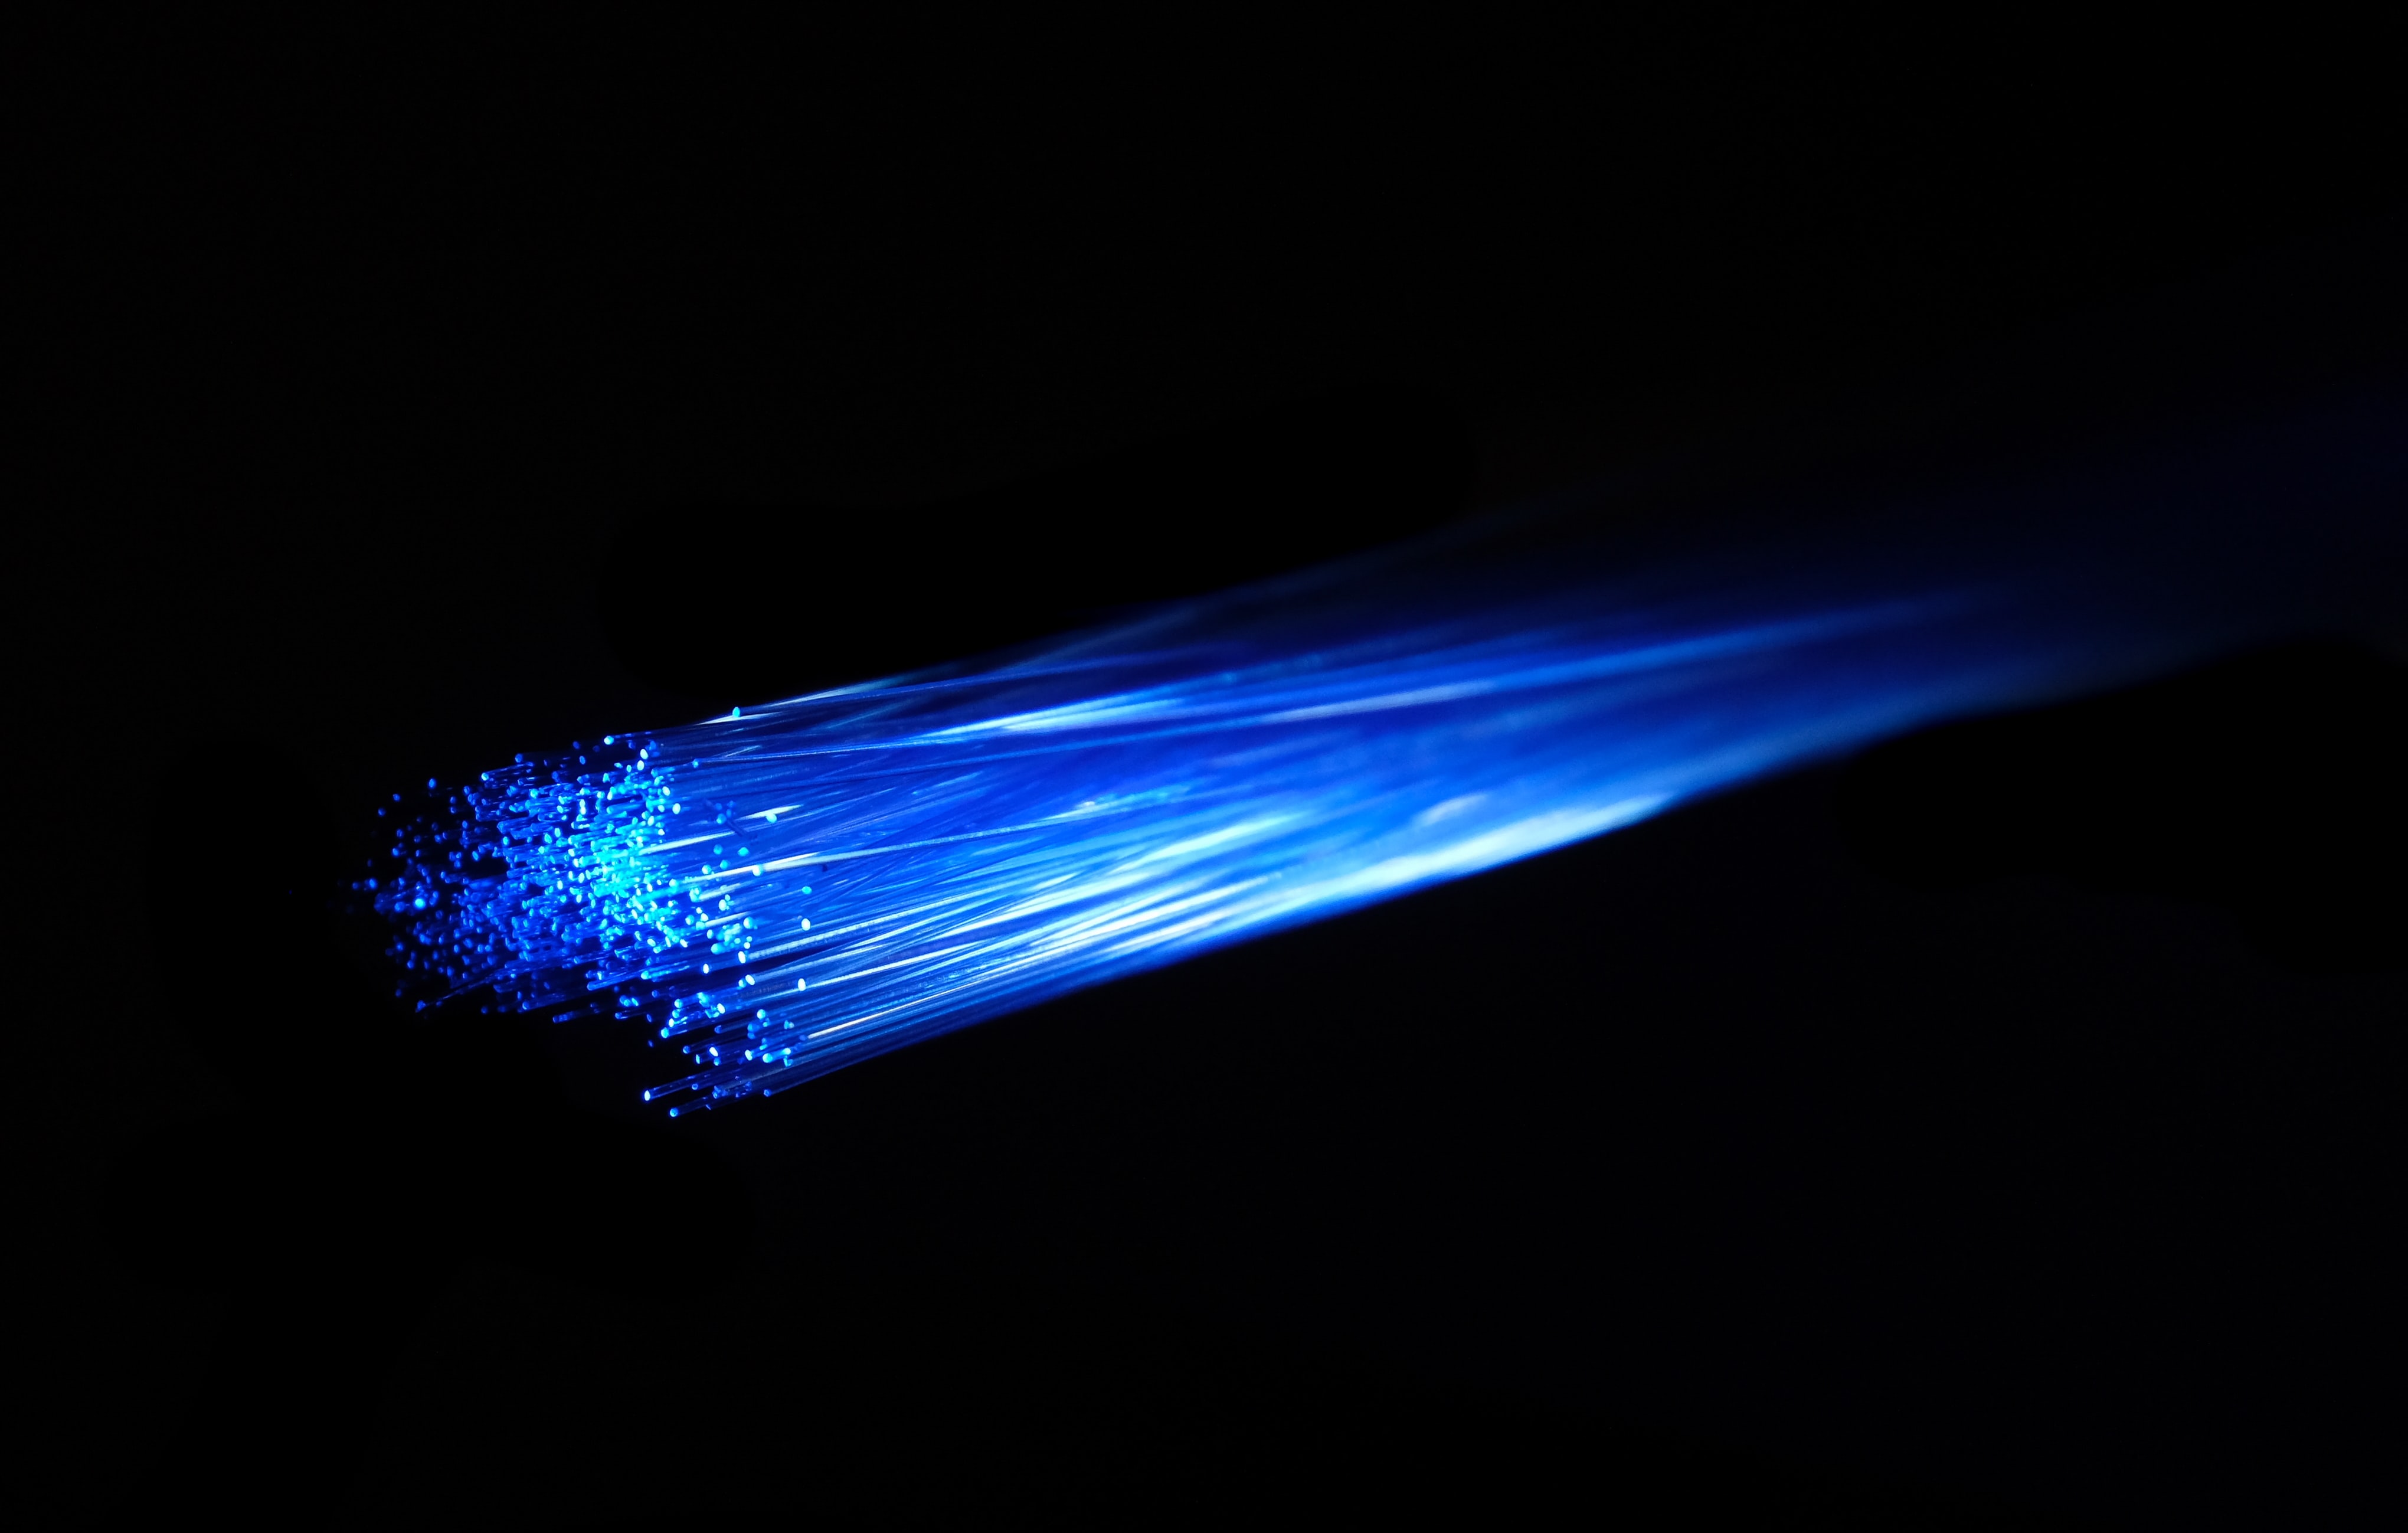 Blue light passing over fibre optic cable.